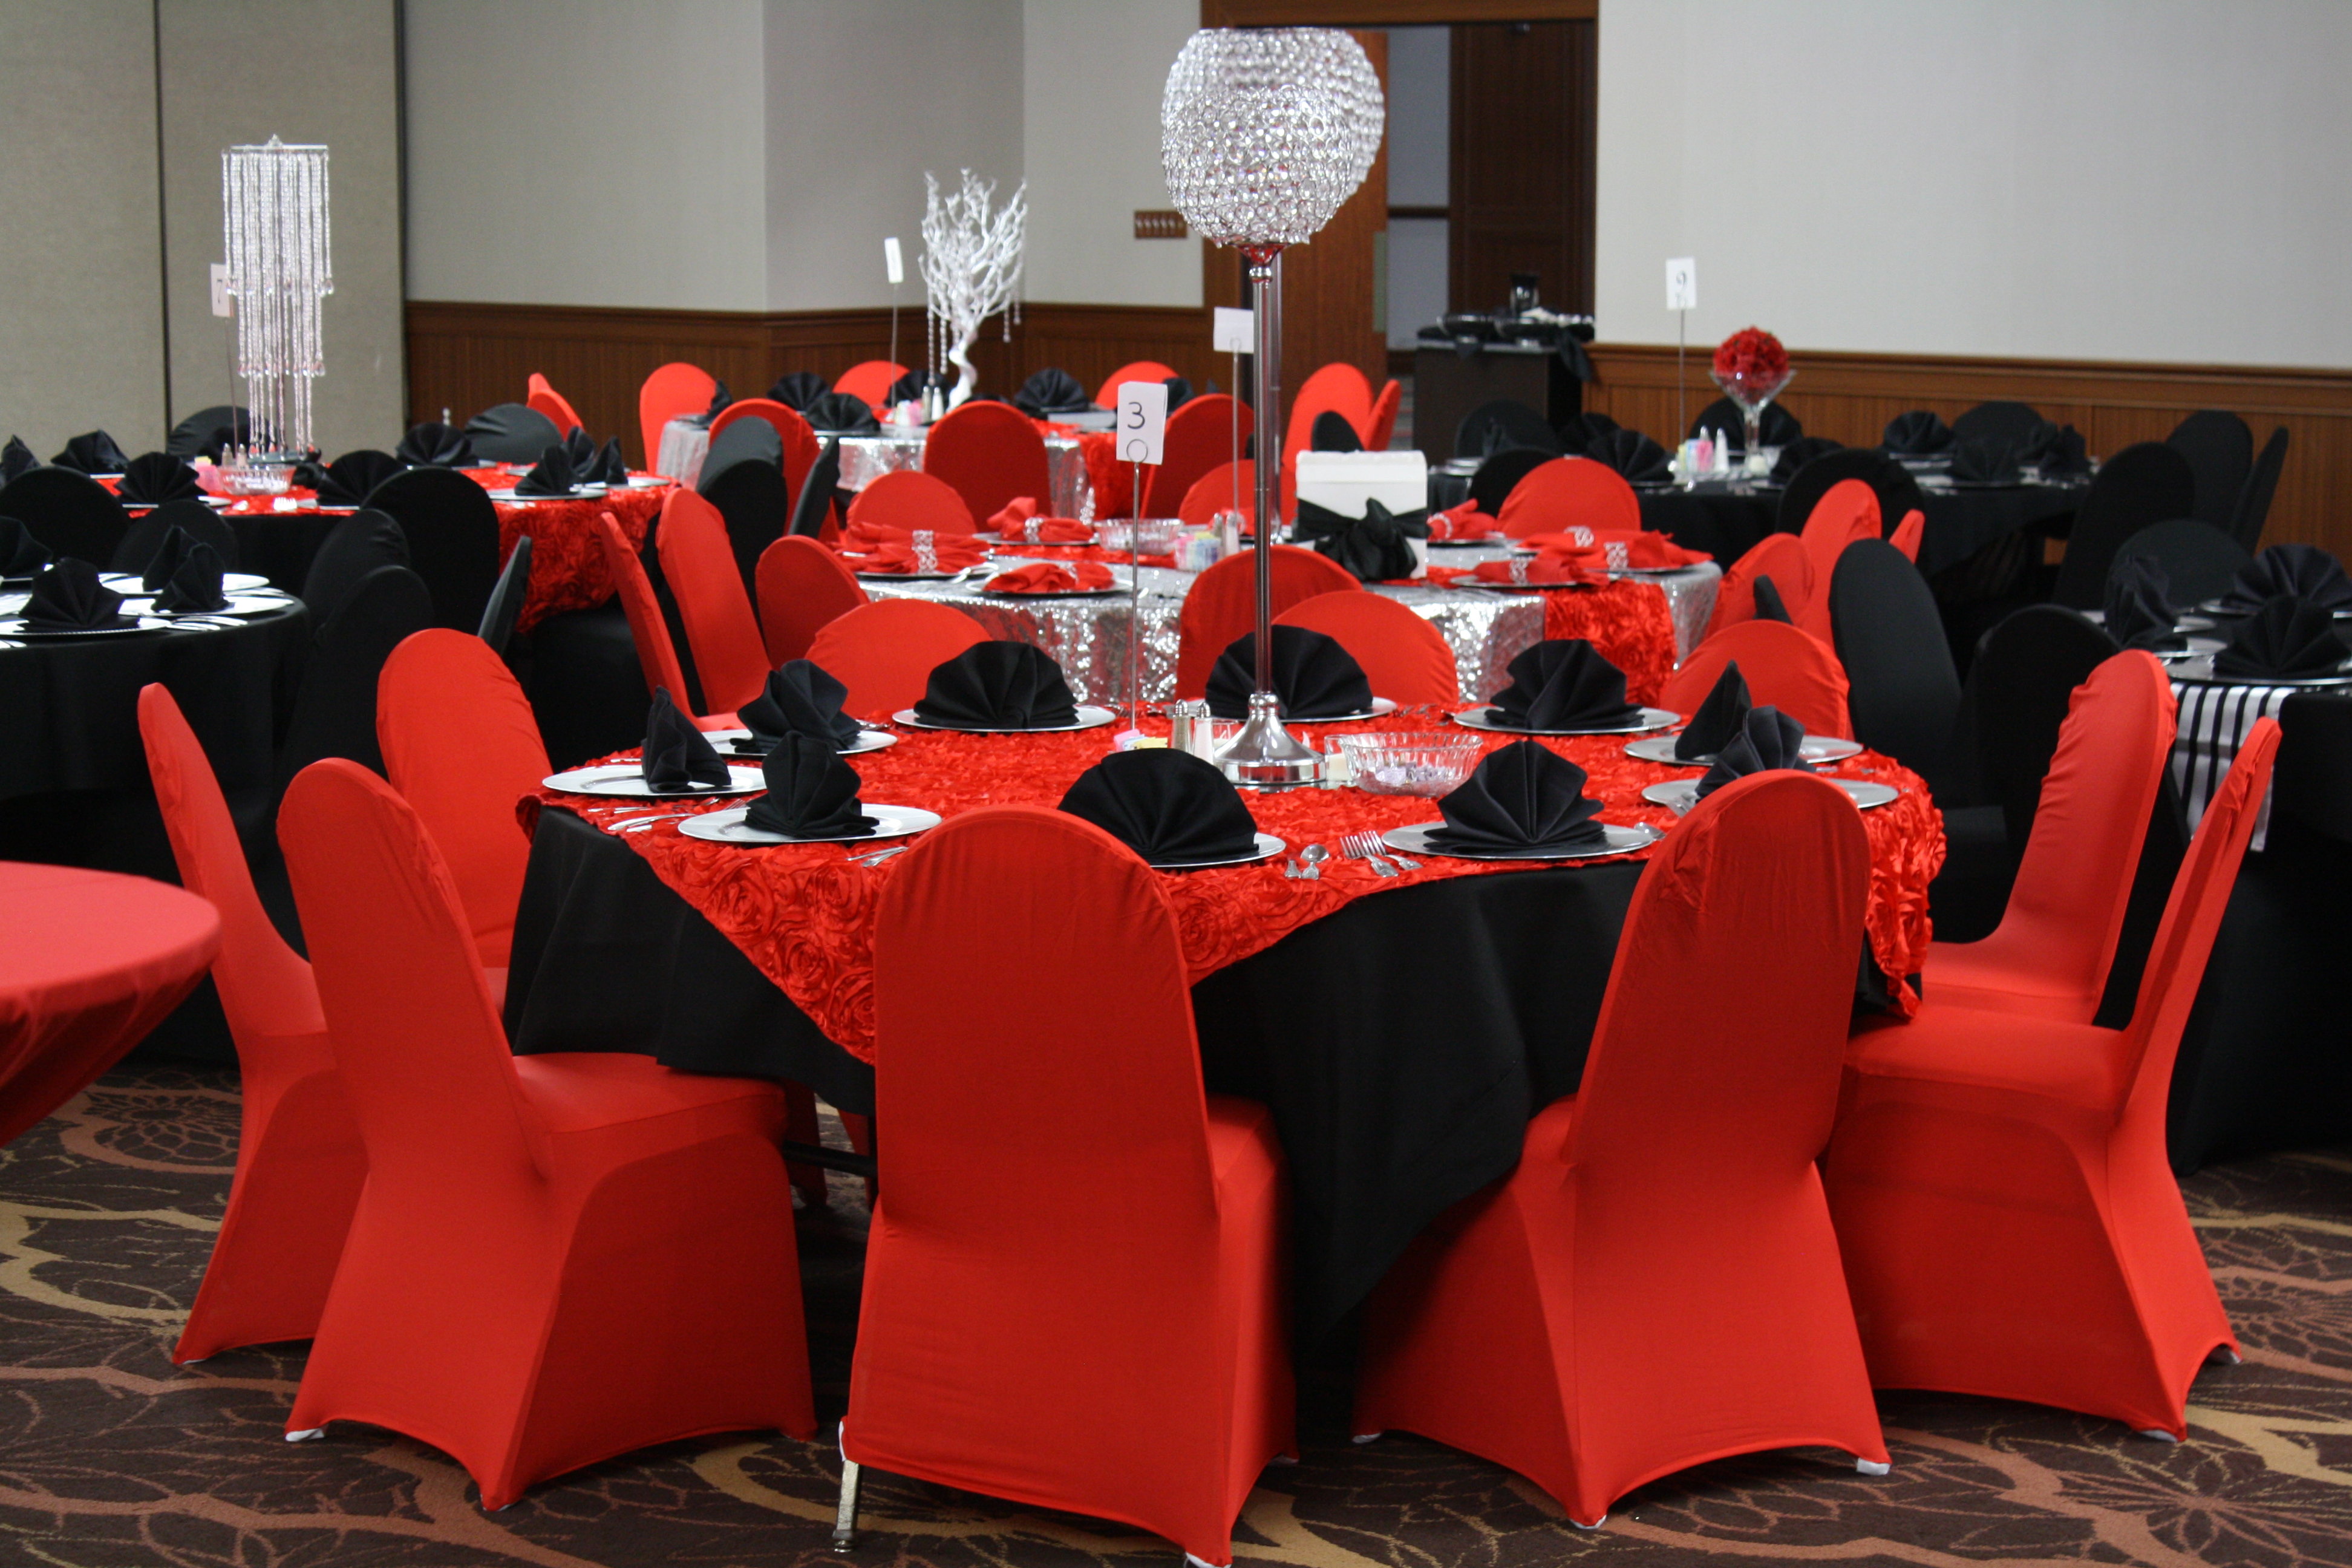 Let us take care of you and your event in our Banquet Room.